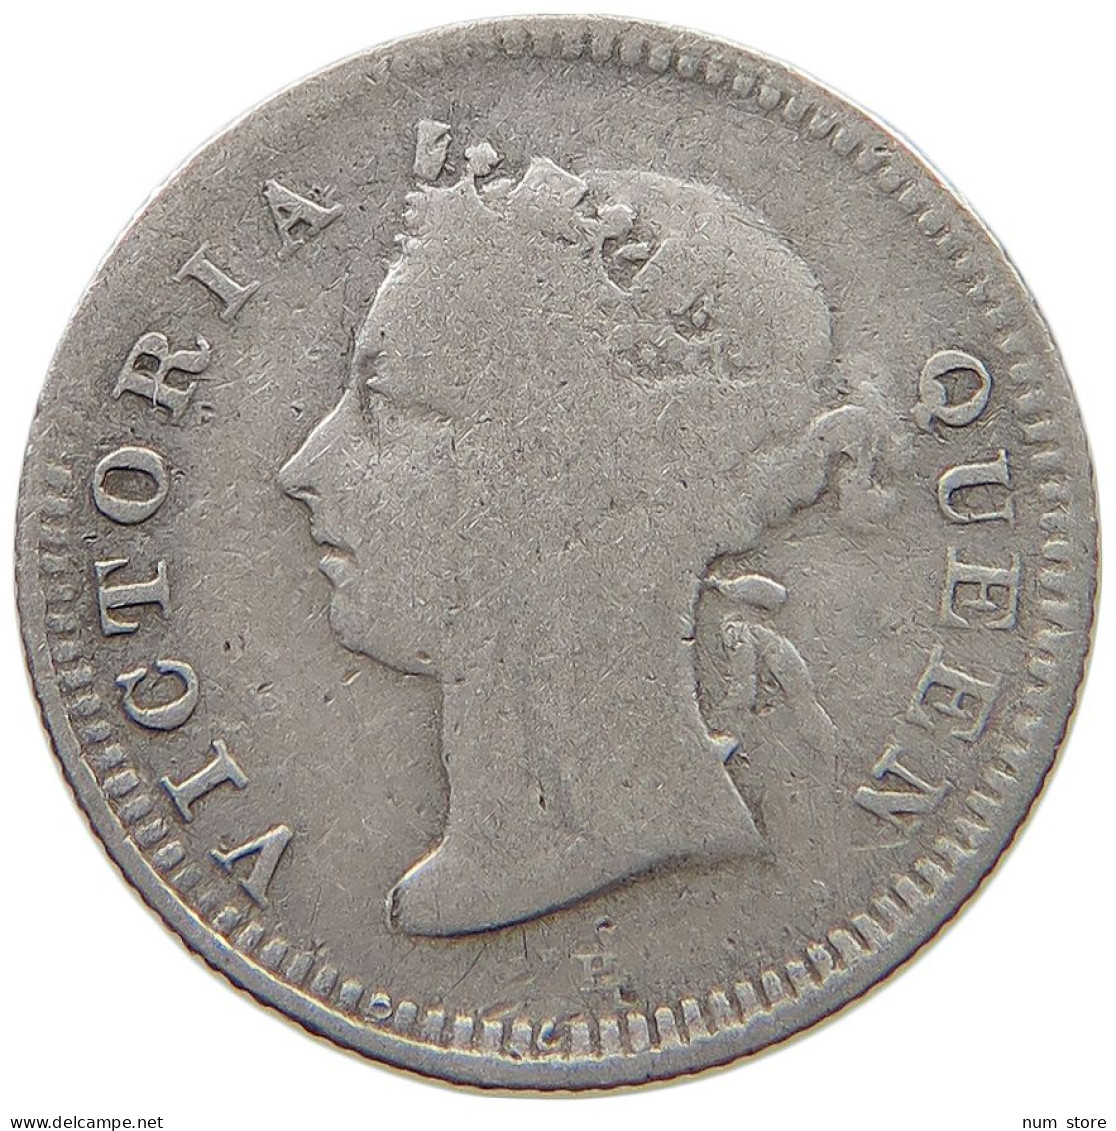 MAURITIUS 10 CENTS 1889 Victoria 1837-1901 #t111 1355 - Maurice